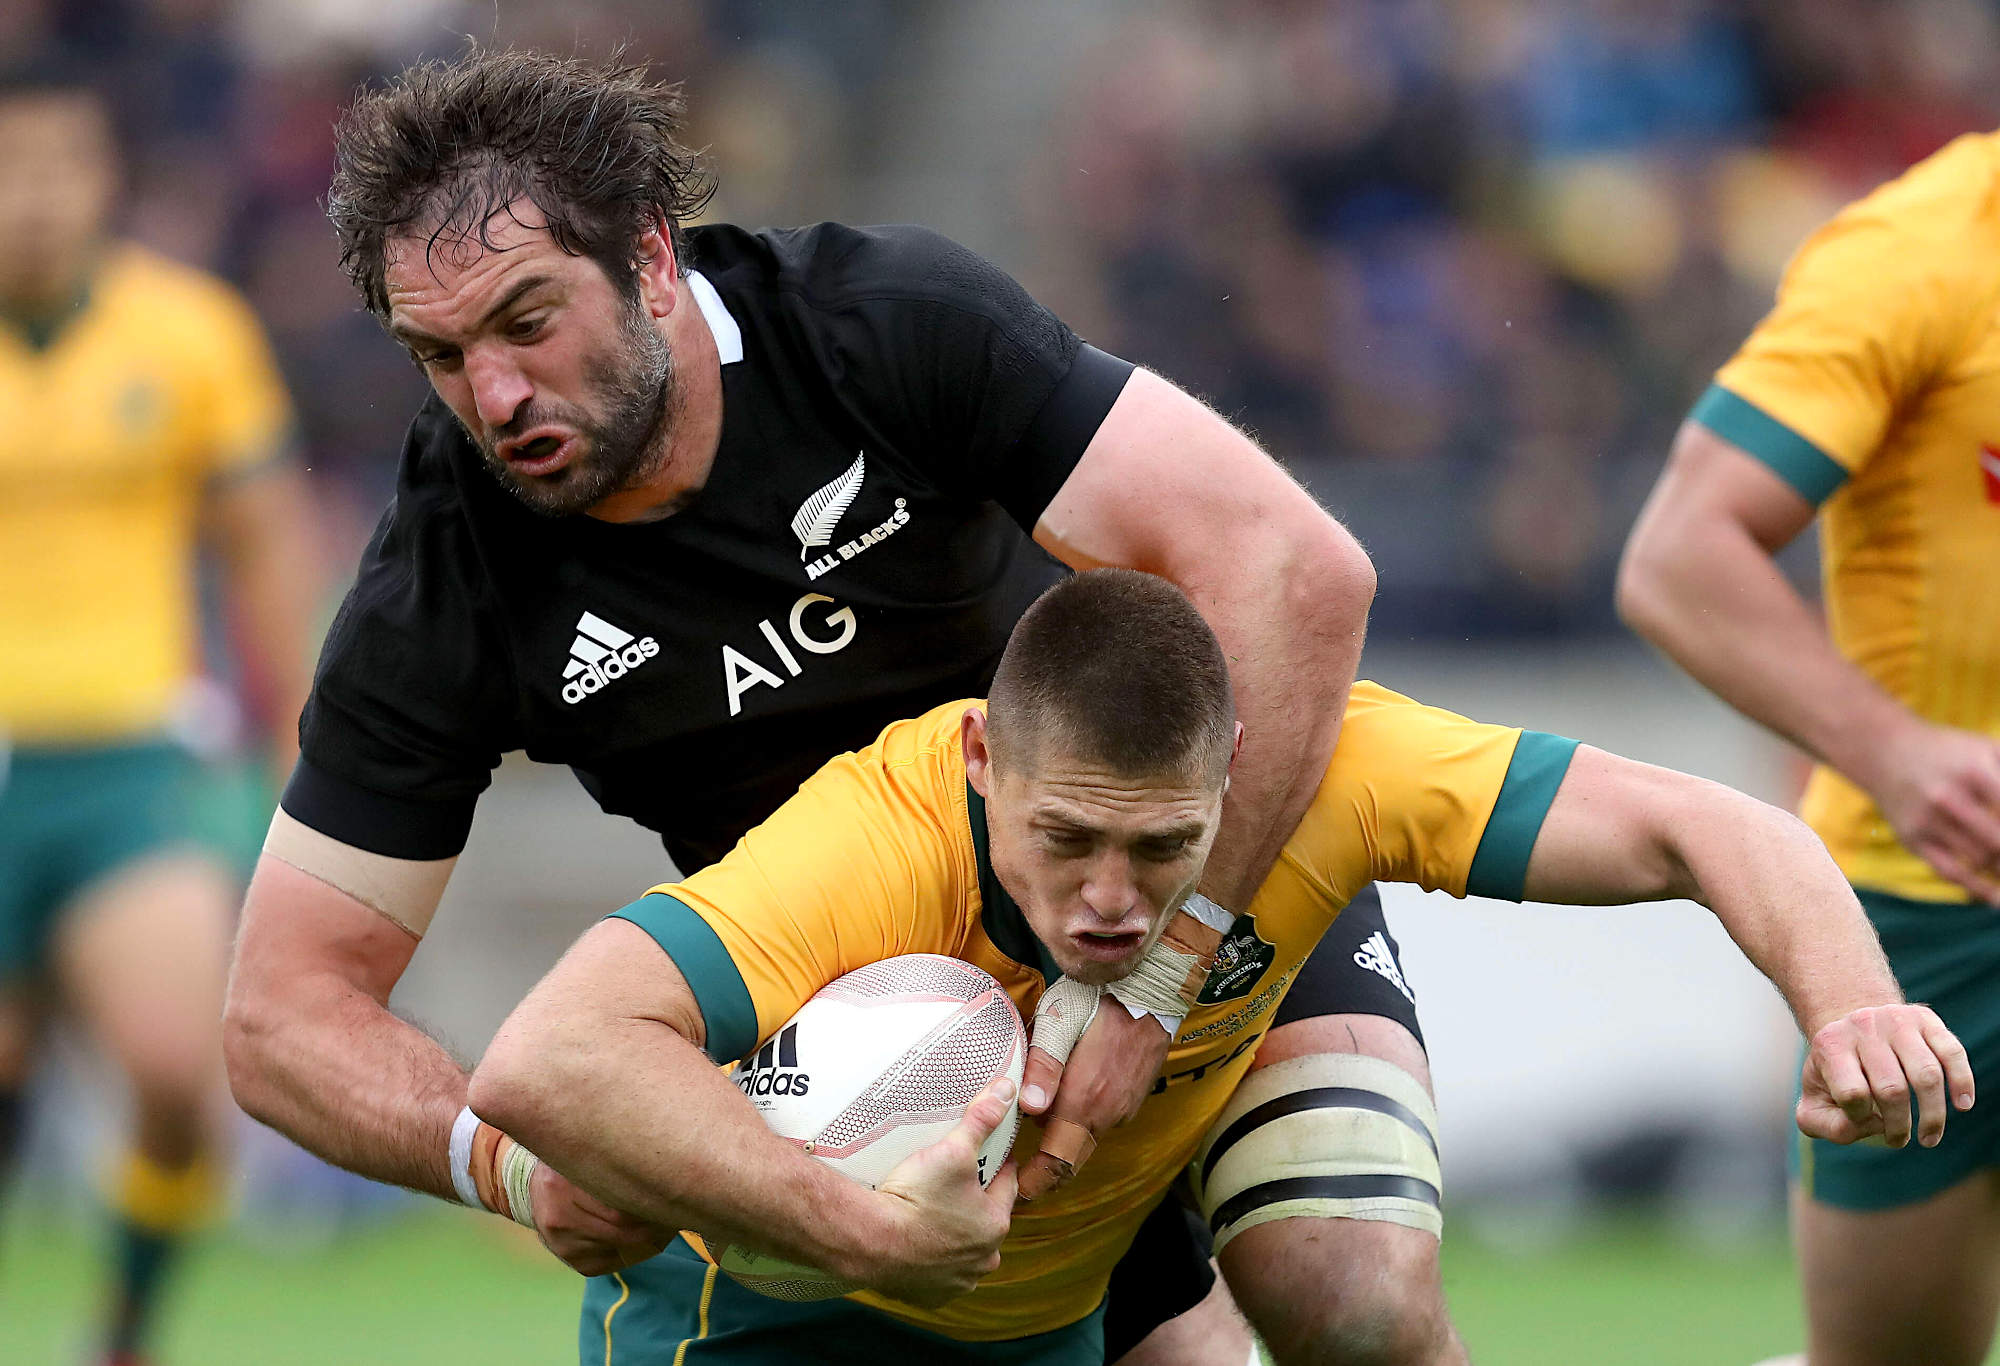 Samuel Whitelock of the All Blacks tackles James O'Connor of the Wallabies